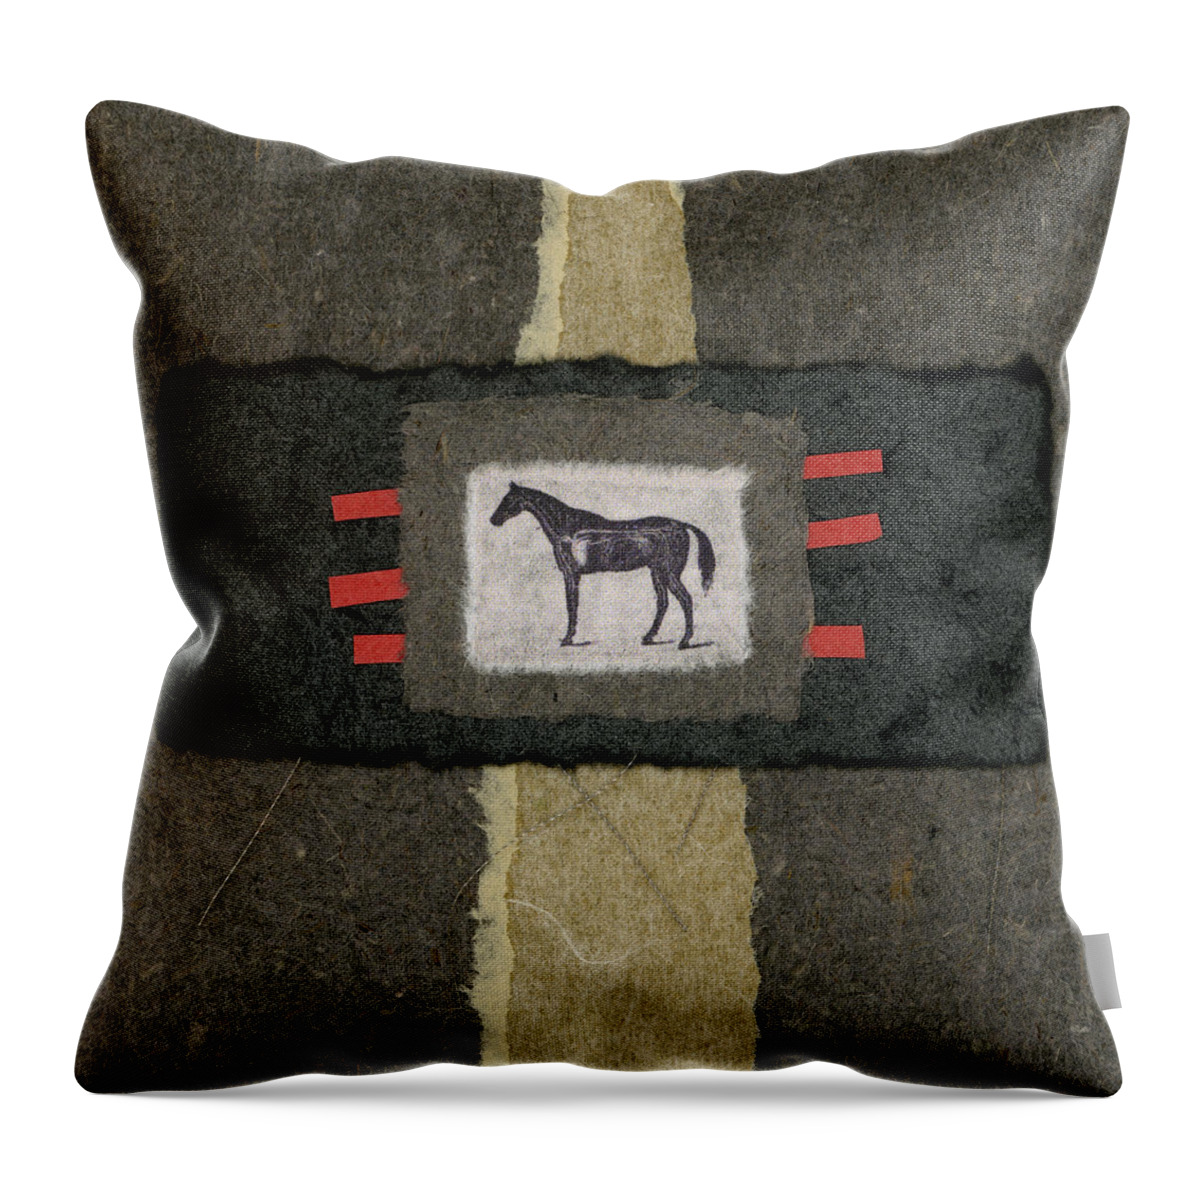 Horse Throw Pillow featuring the photograph Horse Collage by Carol Leigh